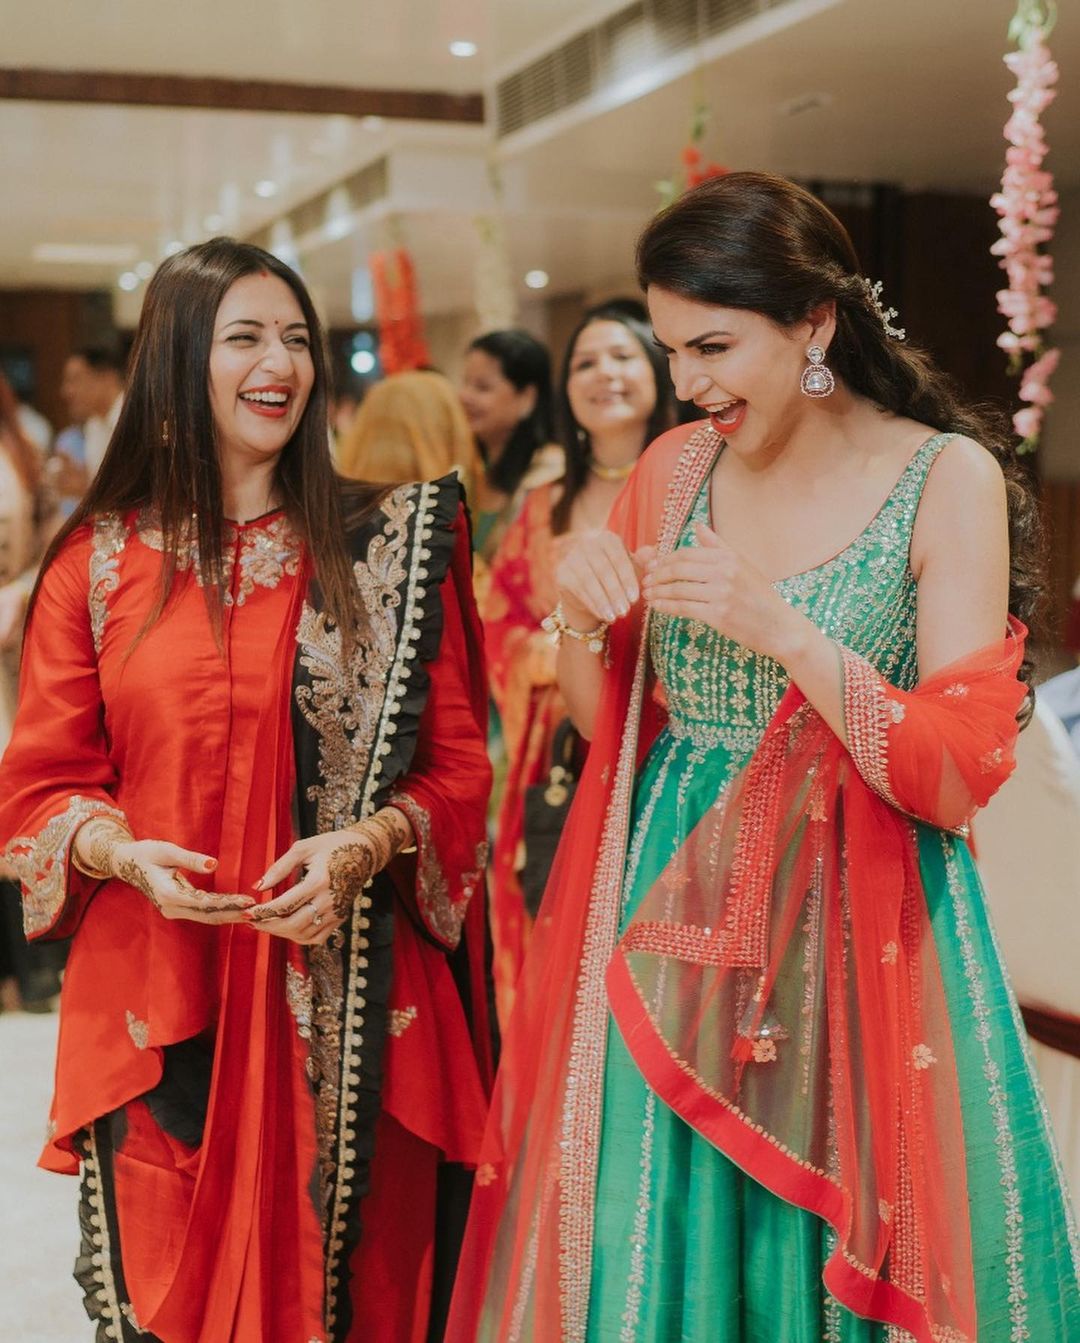 Who Is Divyanka Tripathi and Why Are Her Wedding Pics Going Viral?